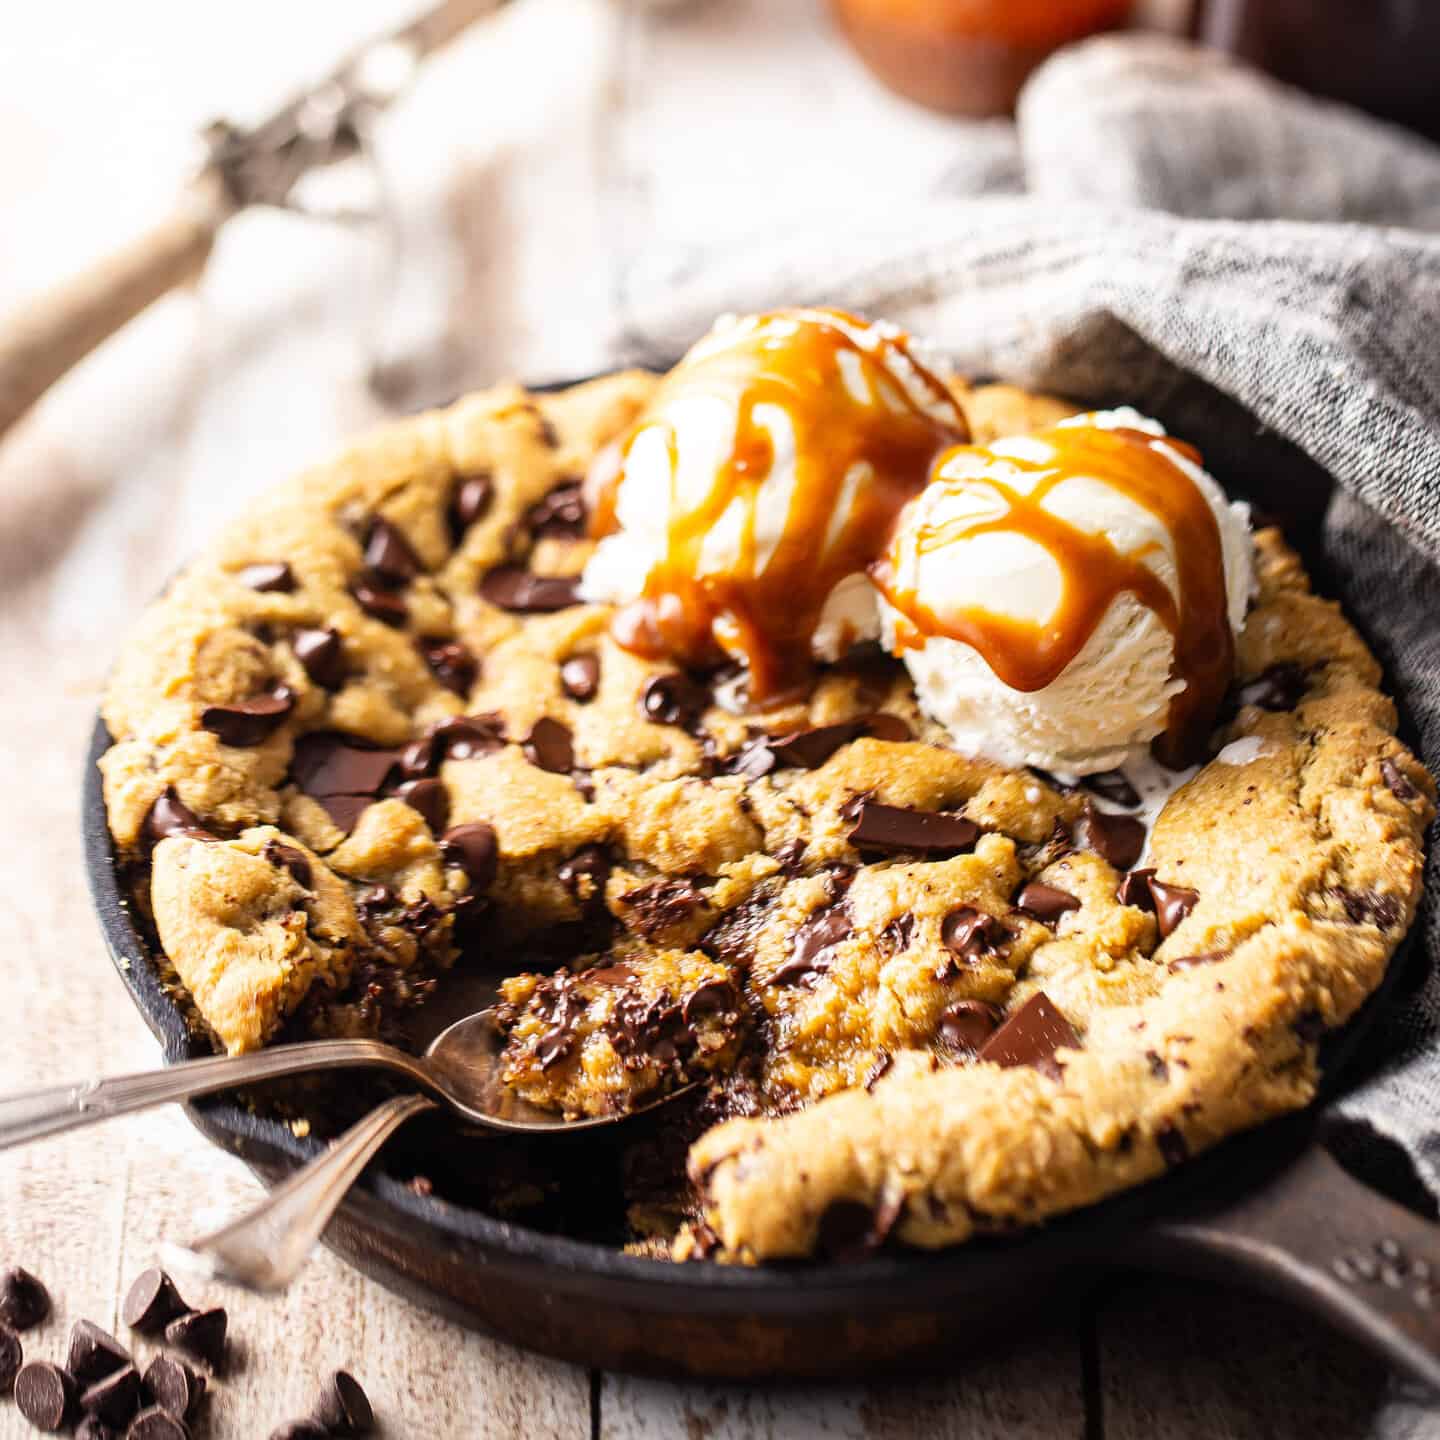 Skillet cookie with ice cream and two spoons.